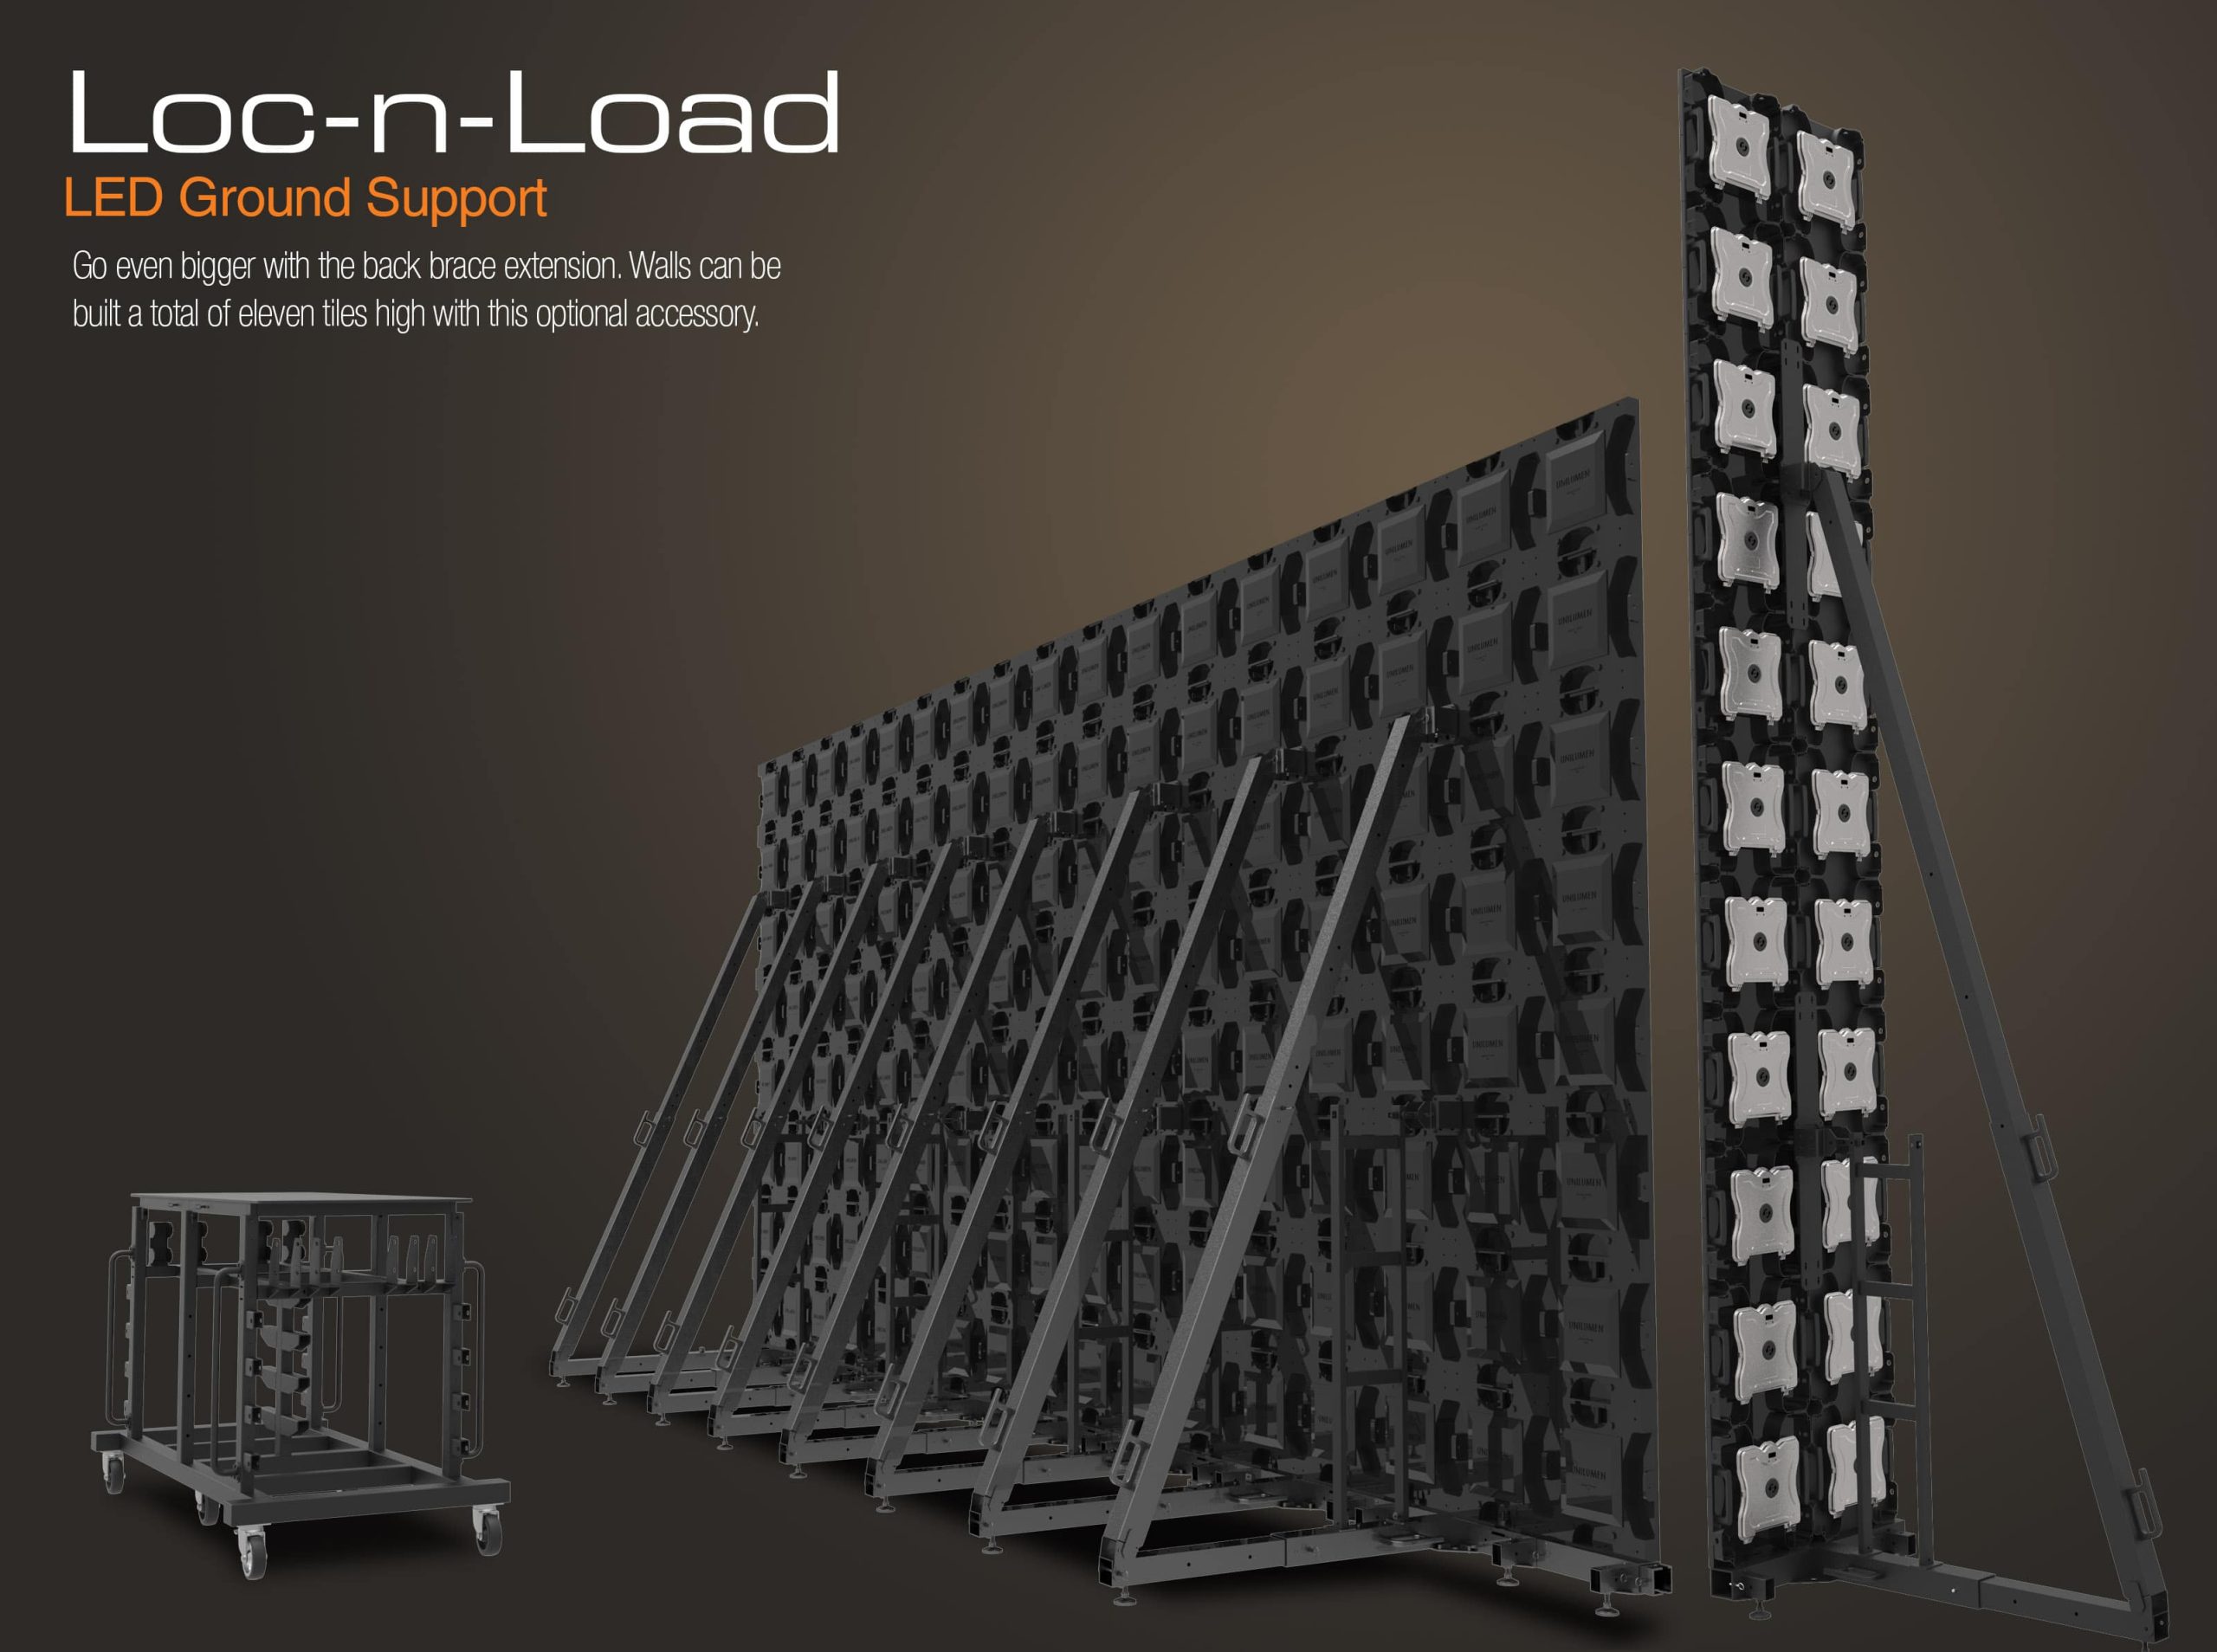 Led Screen Ground Support 16.4' x 9.8' - TechLed